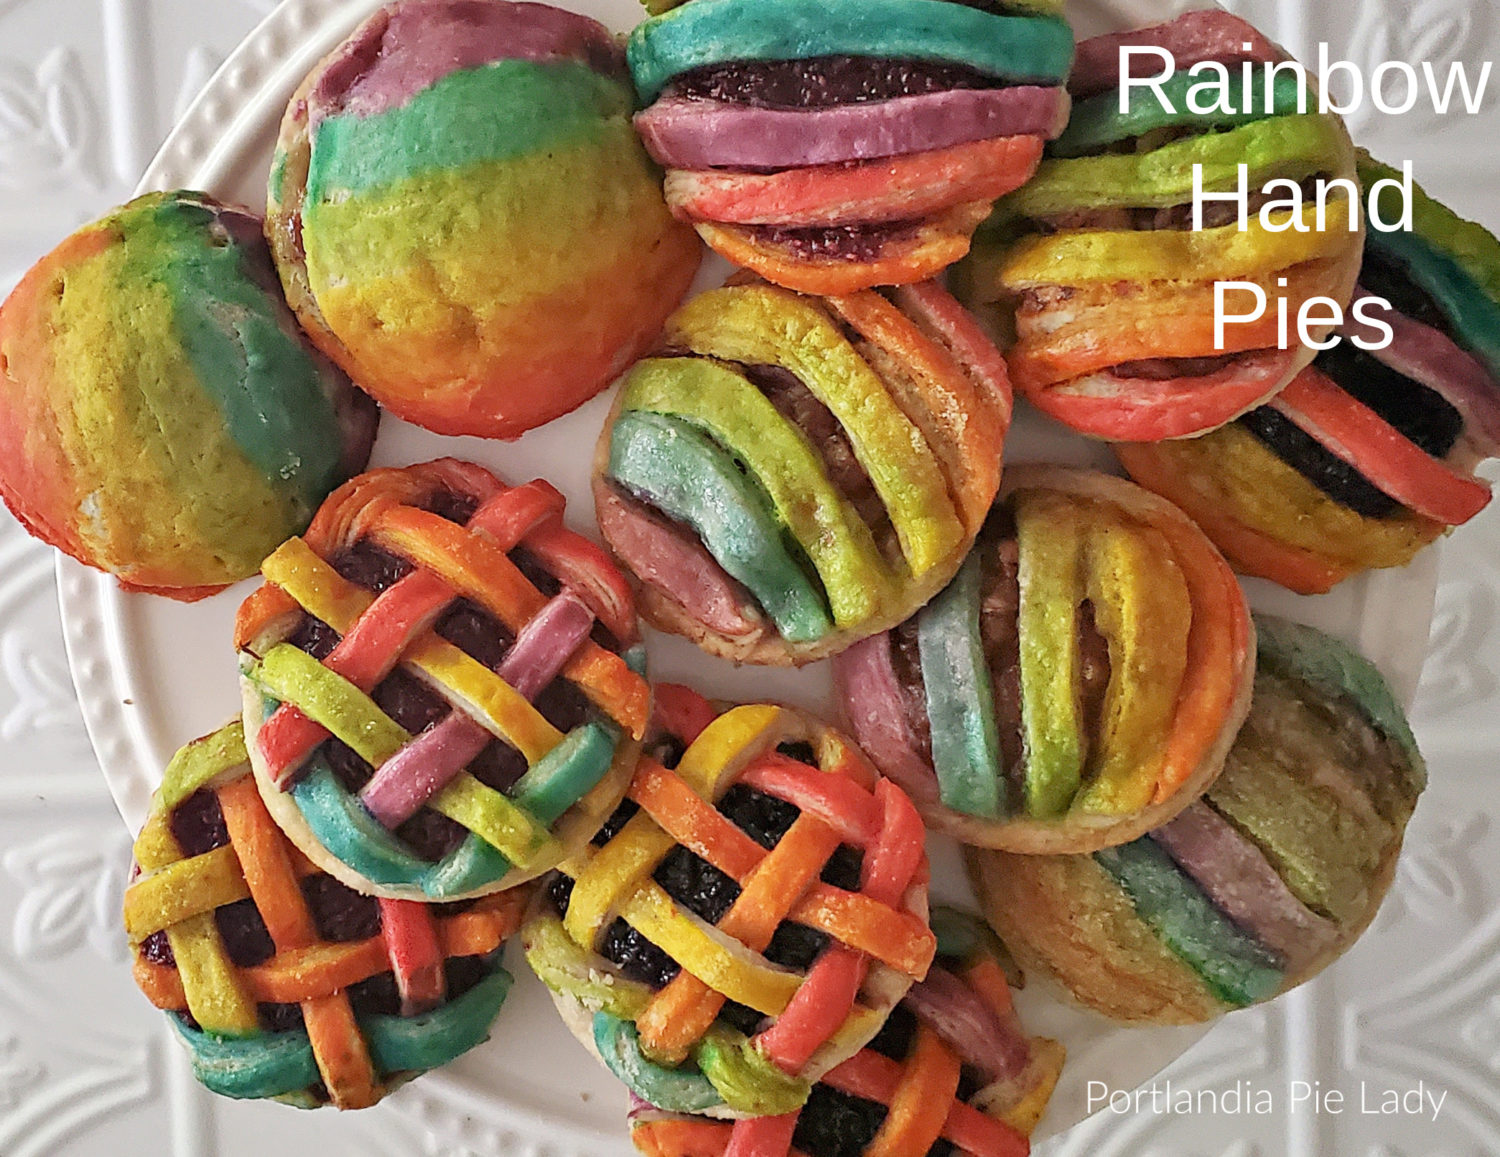 Celebrate your love & pride with Rainbow Hand Pies, fruit filling of your choice, fun and creativity in the kitchen awaits!